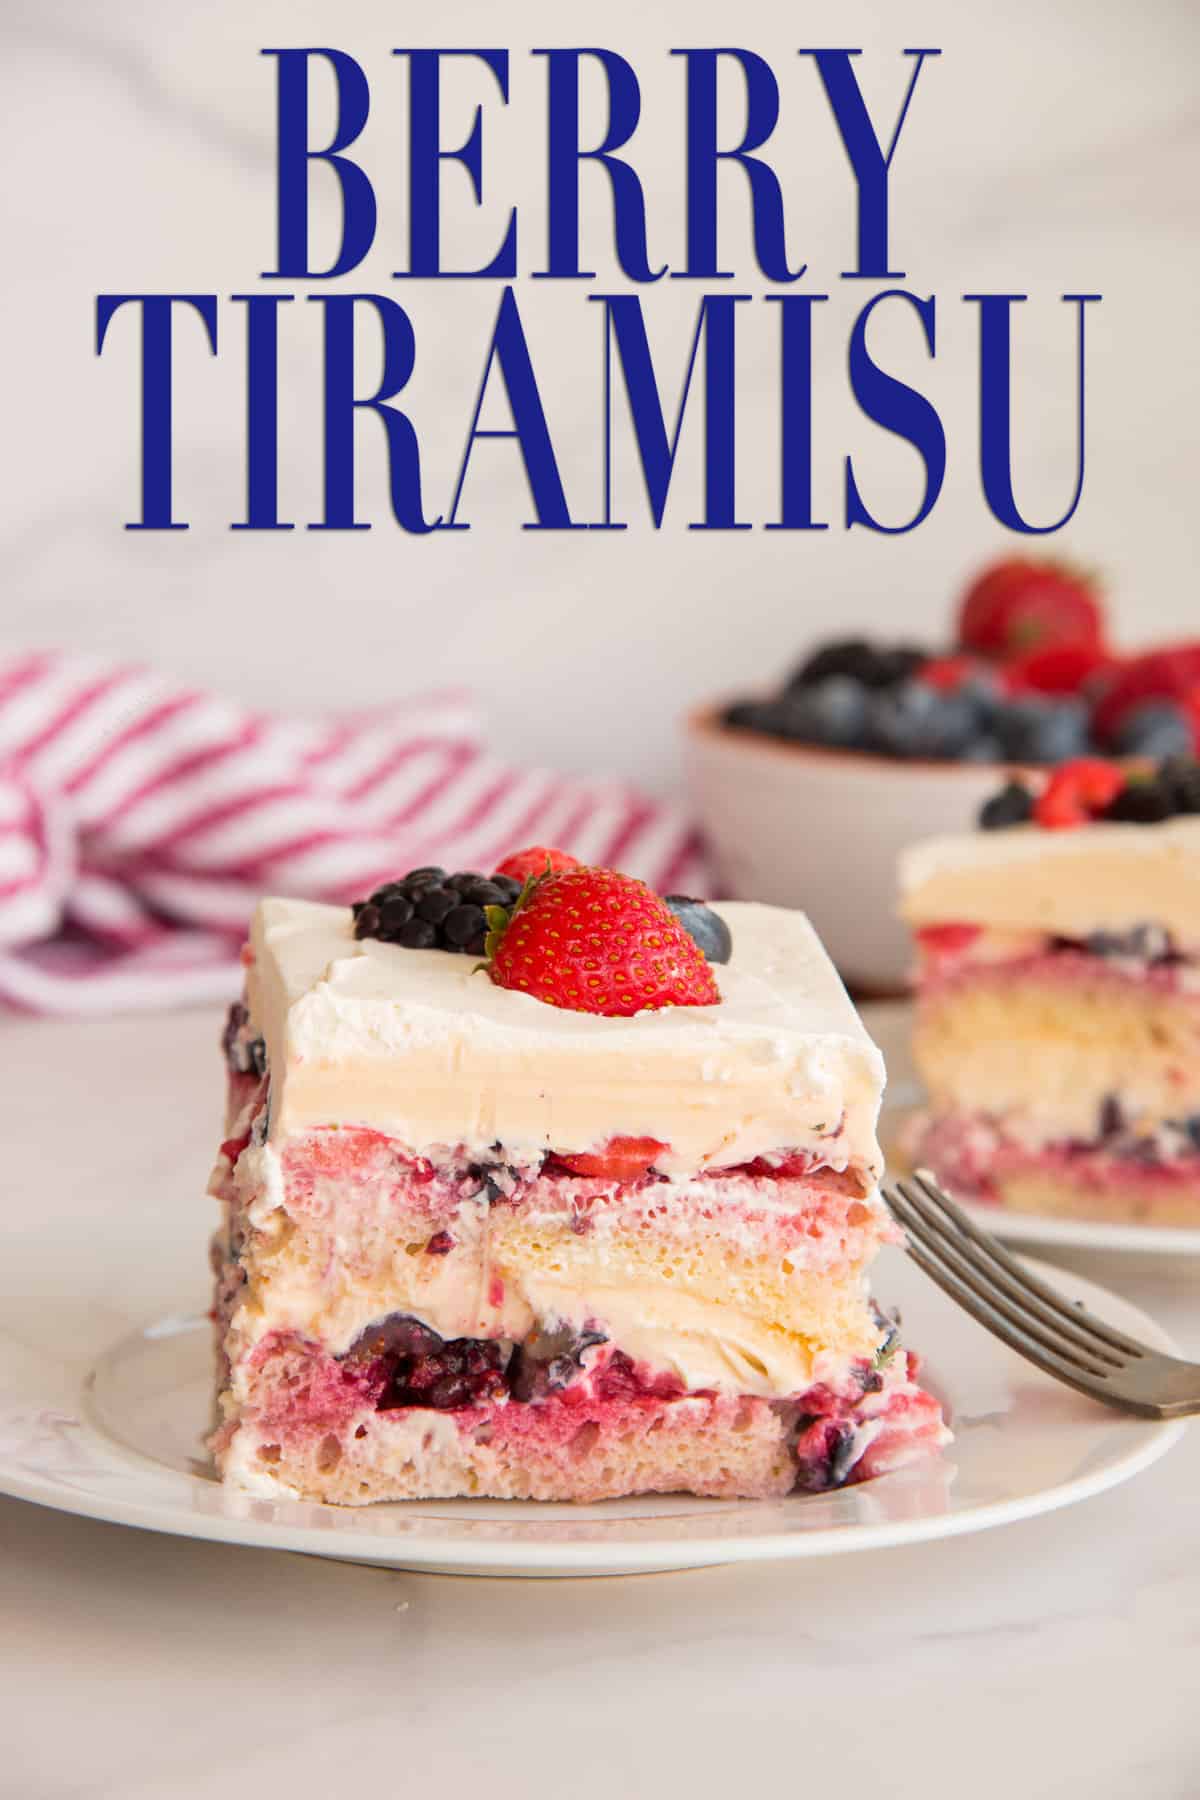 This Berry Tiramisu gives a brightness to the classic Italian "pick-me-up" dessert by swapping the coffee and cocoa out for fresh berries and green tea. You'll love how refreshingly and light this dessert is. So much so, it'll make an appearance at all of you summer festivities. #tiramisurecipe #berrydessert #berrytiramisu #Italiandessert #dessert #cakerecipes #spongecake #strawberrydesserts #mascarpone #LaborDay #Juneteenth #July4thdesserts via @ediblesense